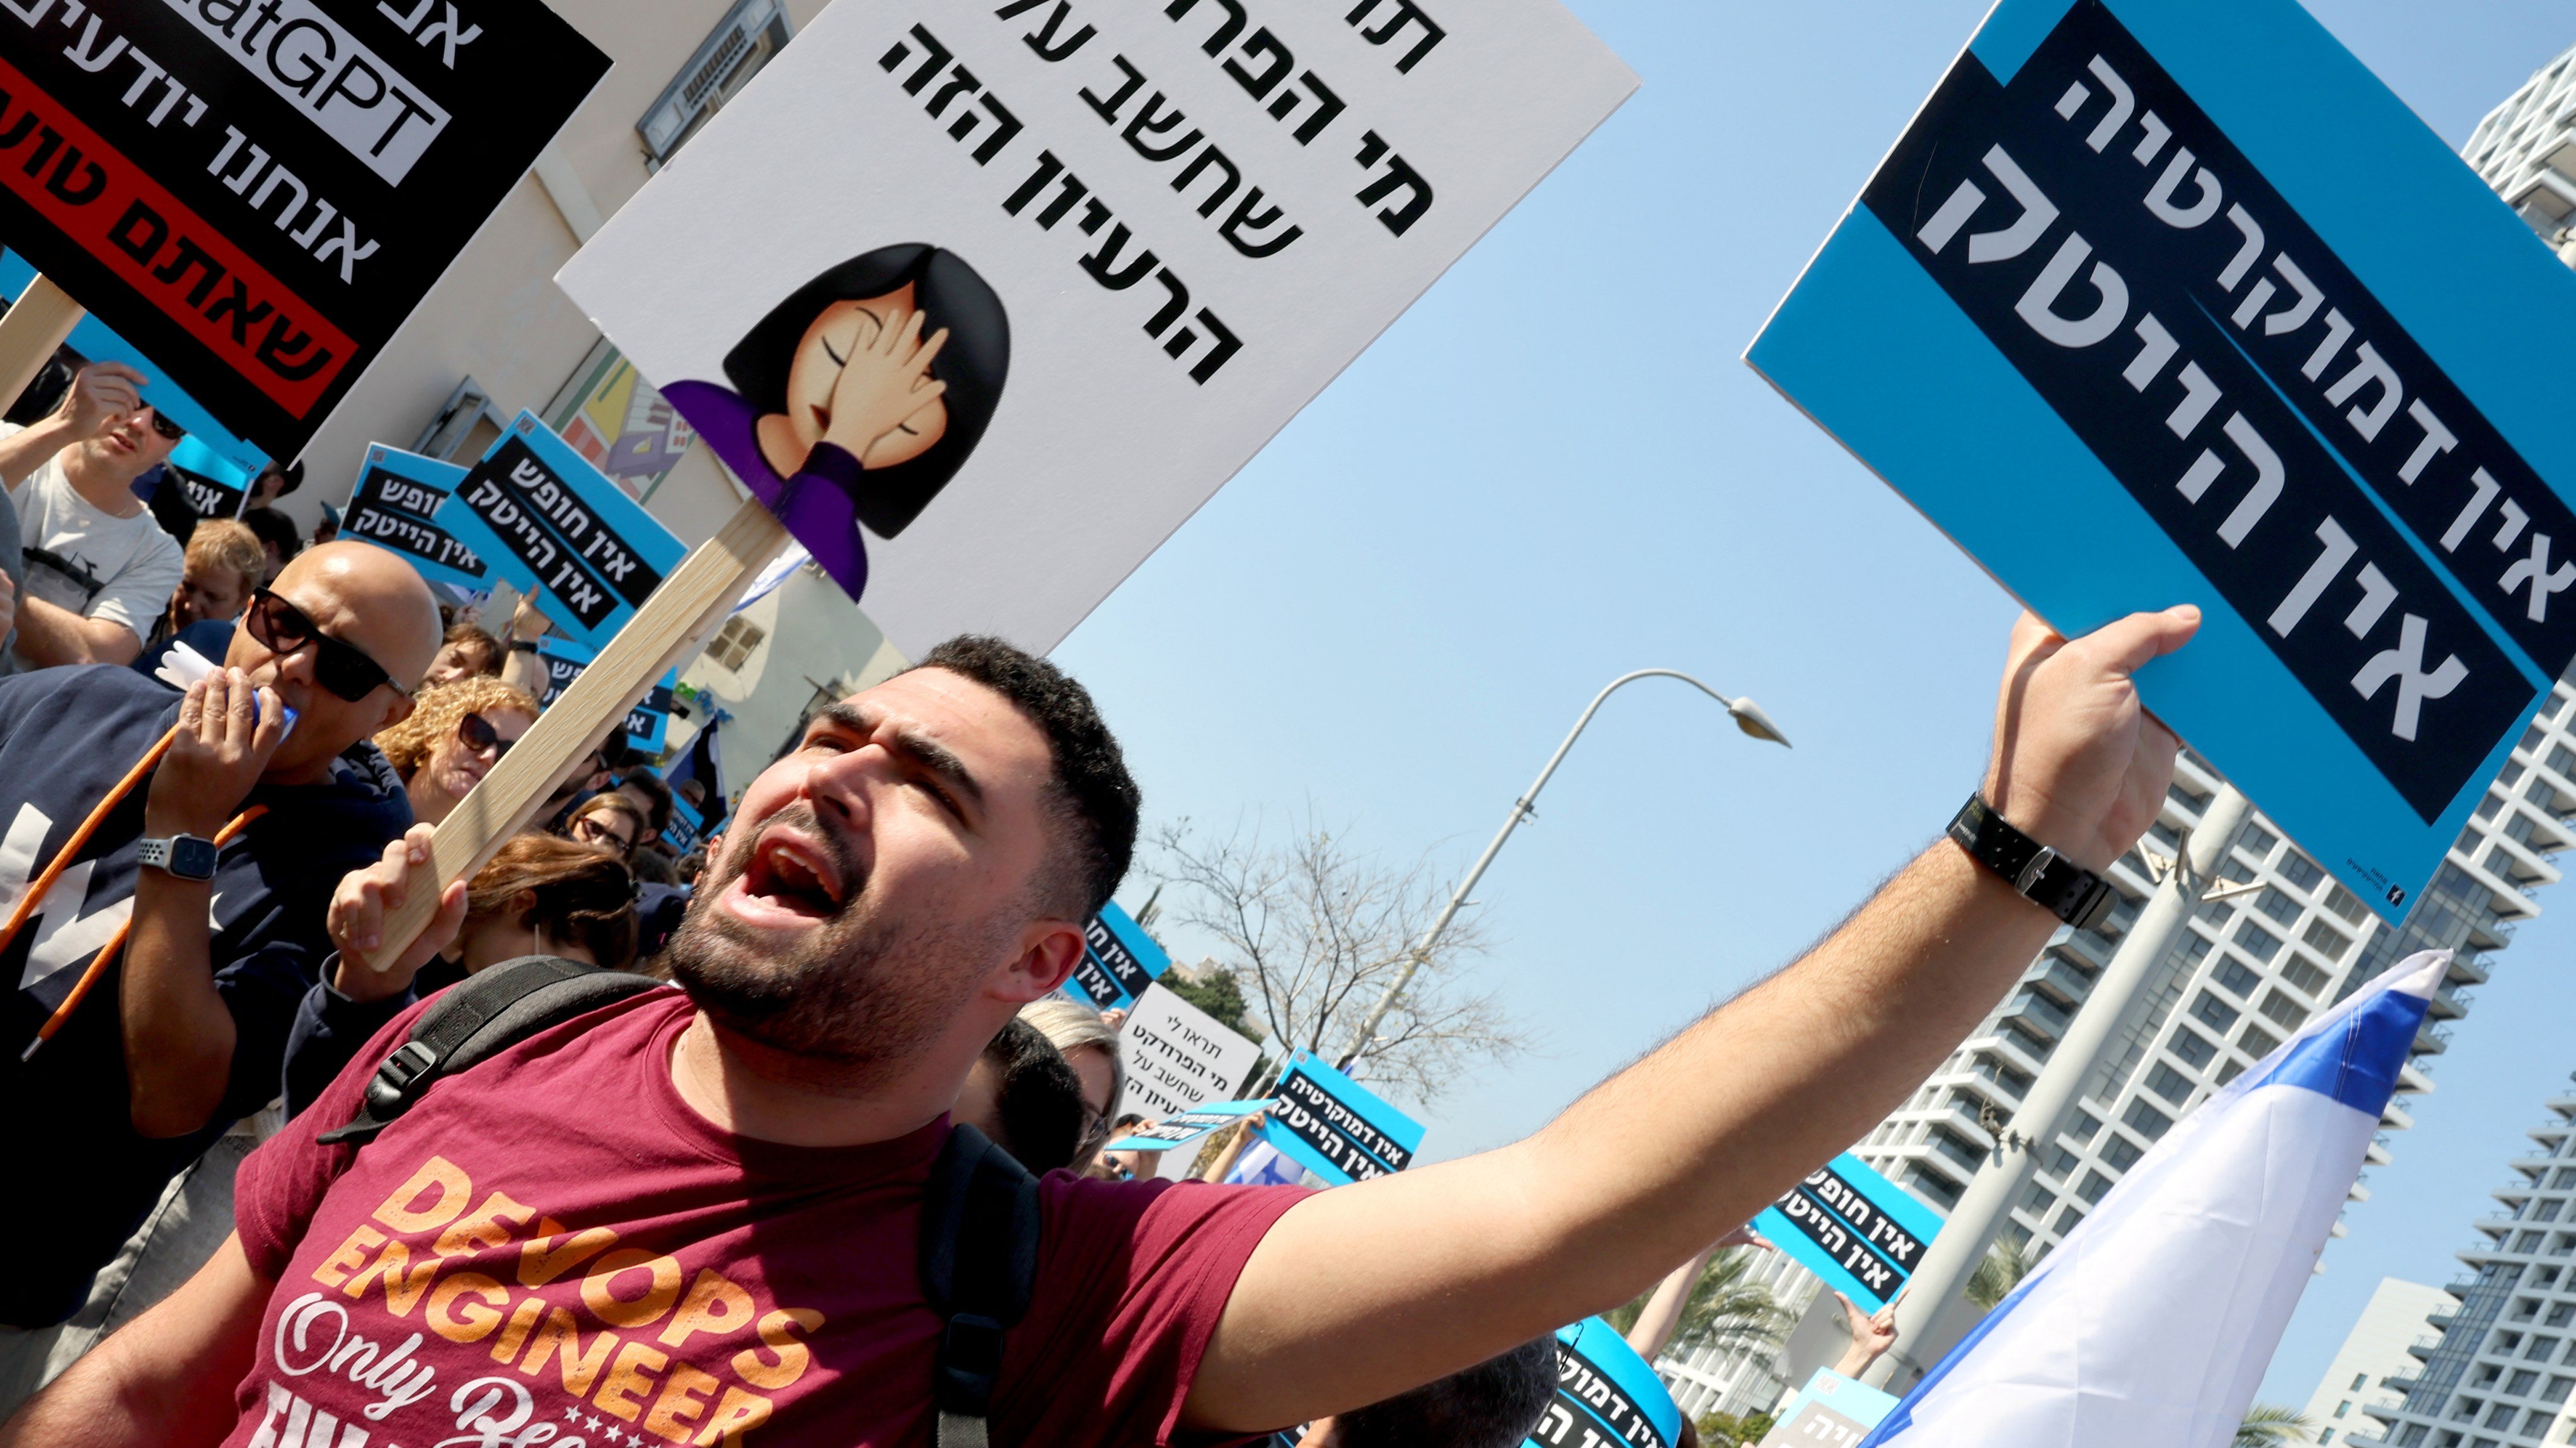 High-tech company workers block a road and lift placards as they strike for an hour in Israel's coastal city of Tel Aviv, on 24 January 2023, to protest the Israeli government's controversial plans to overhaul the judicial system.